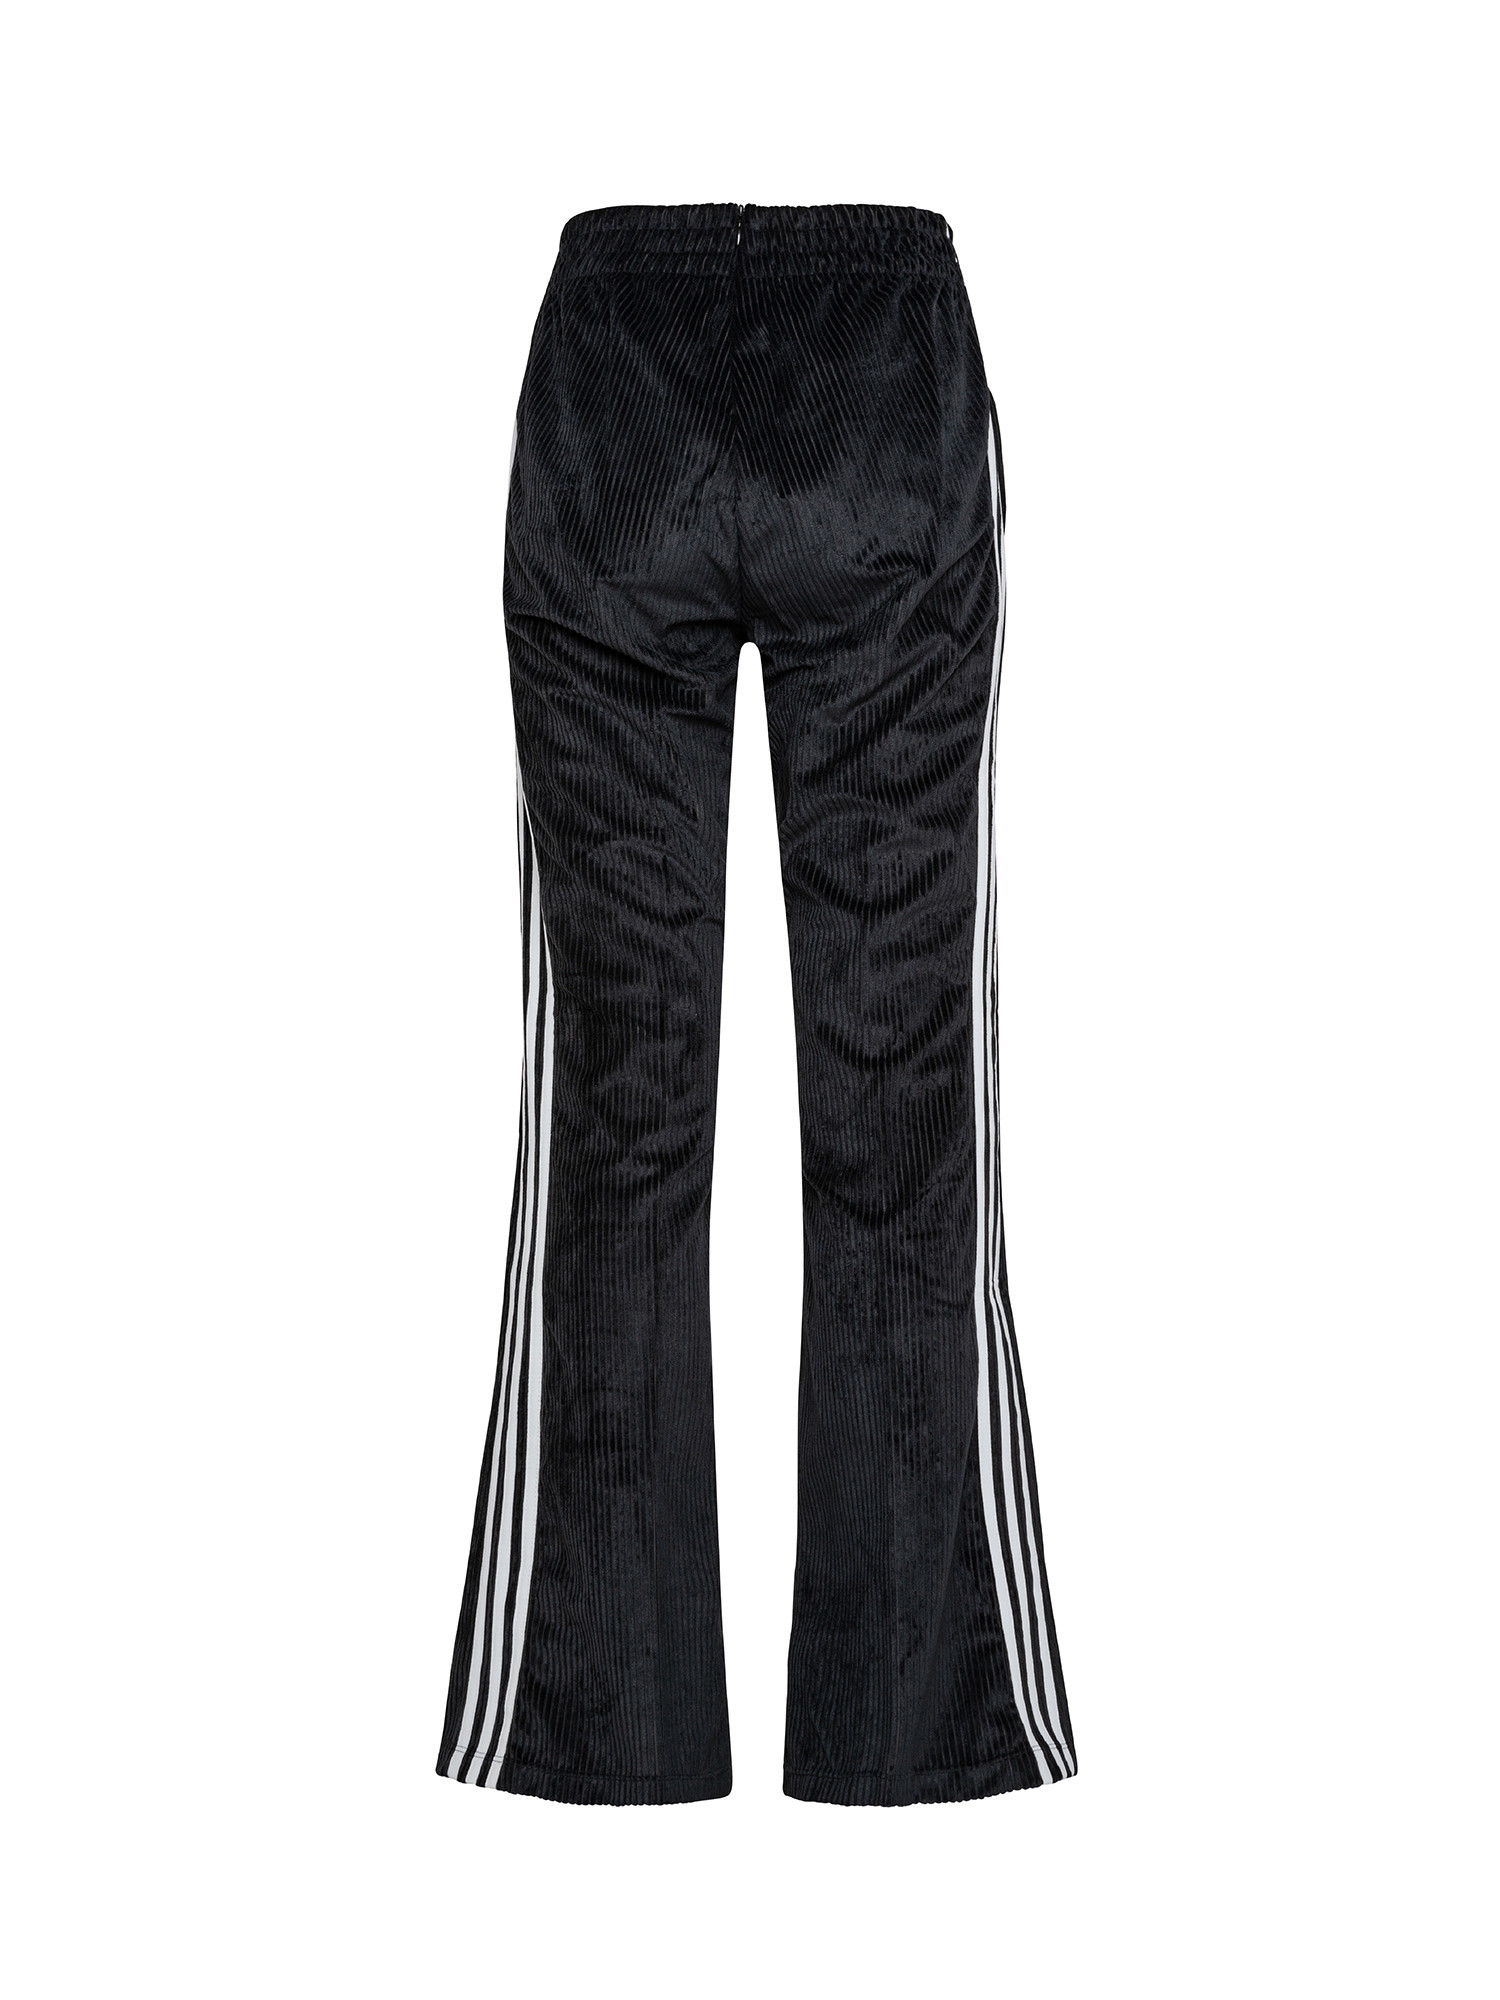 Relaxed Pant, Nero, large image number 1